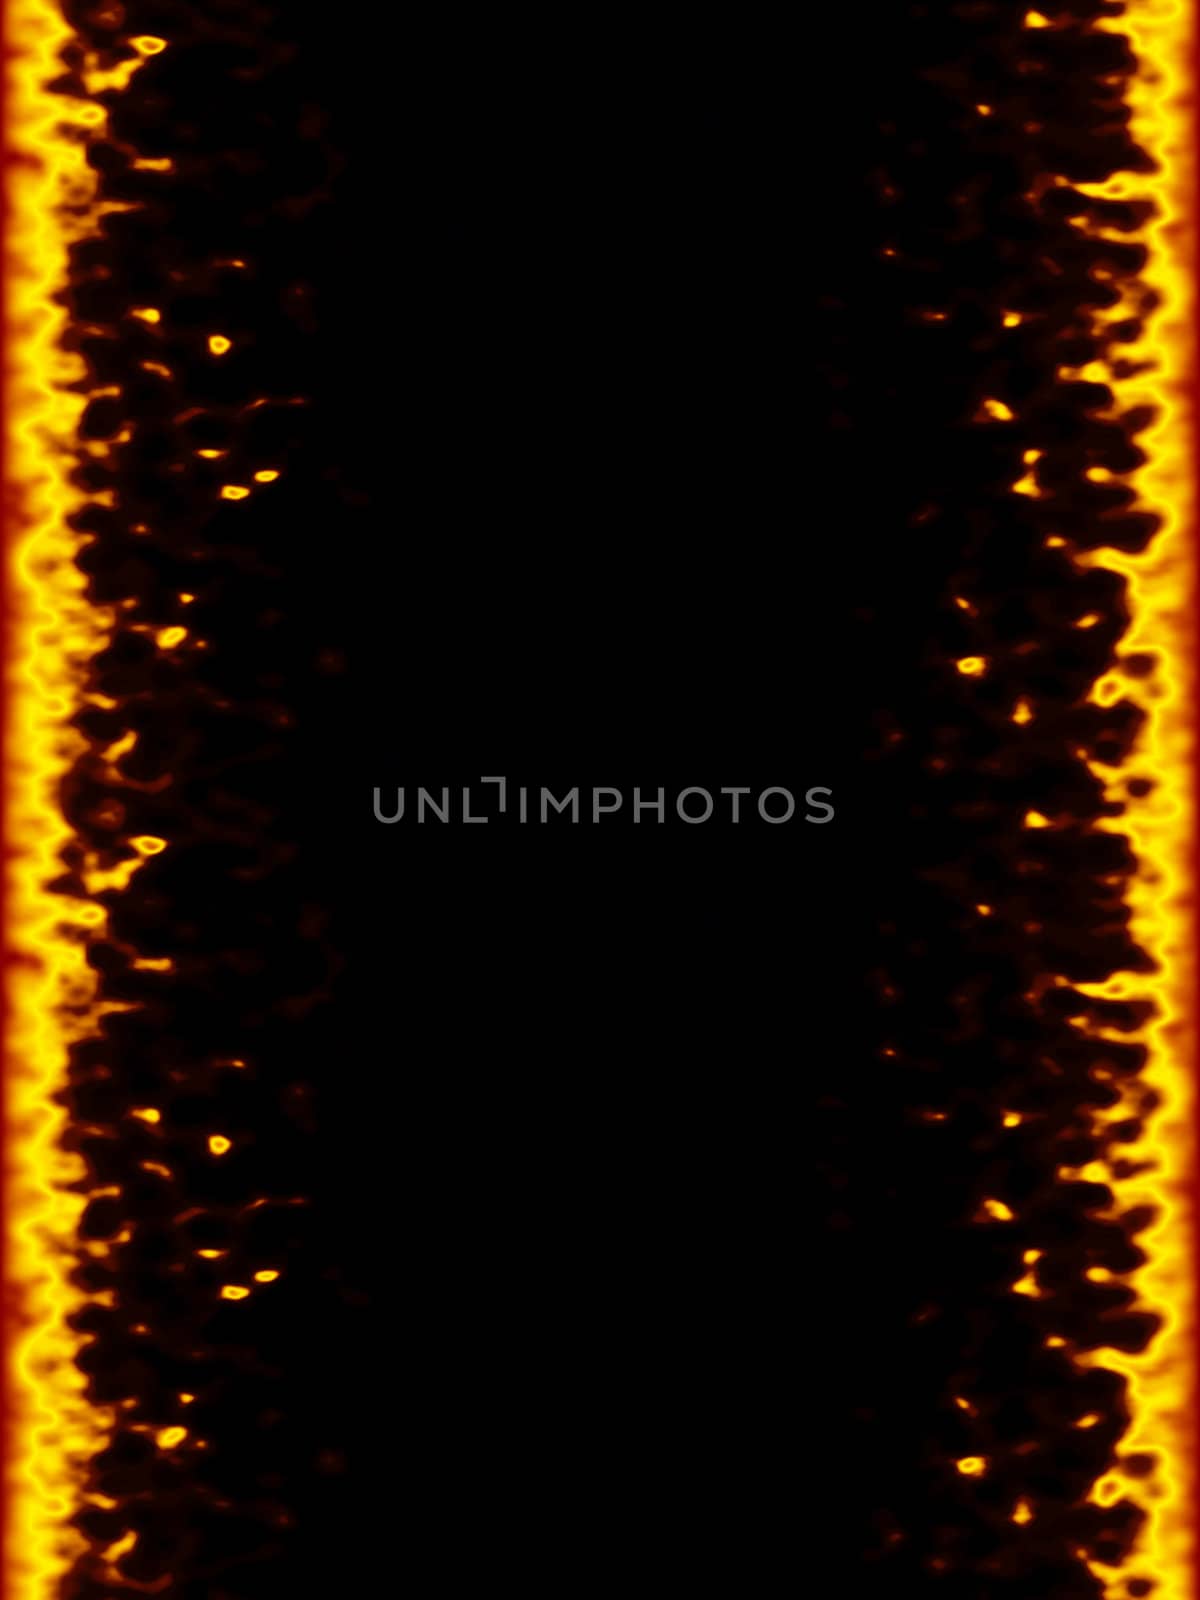 An image of a nice fire frame on black background